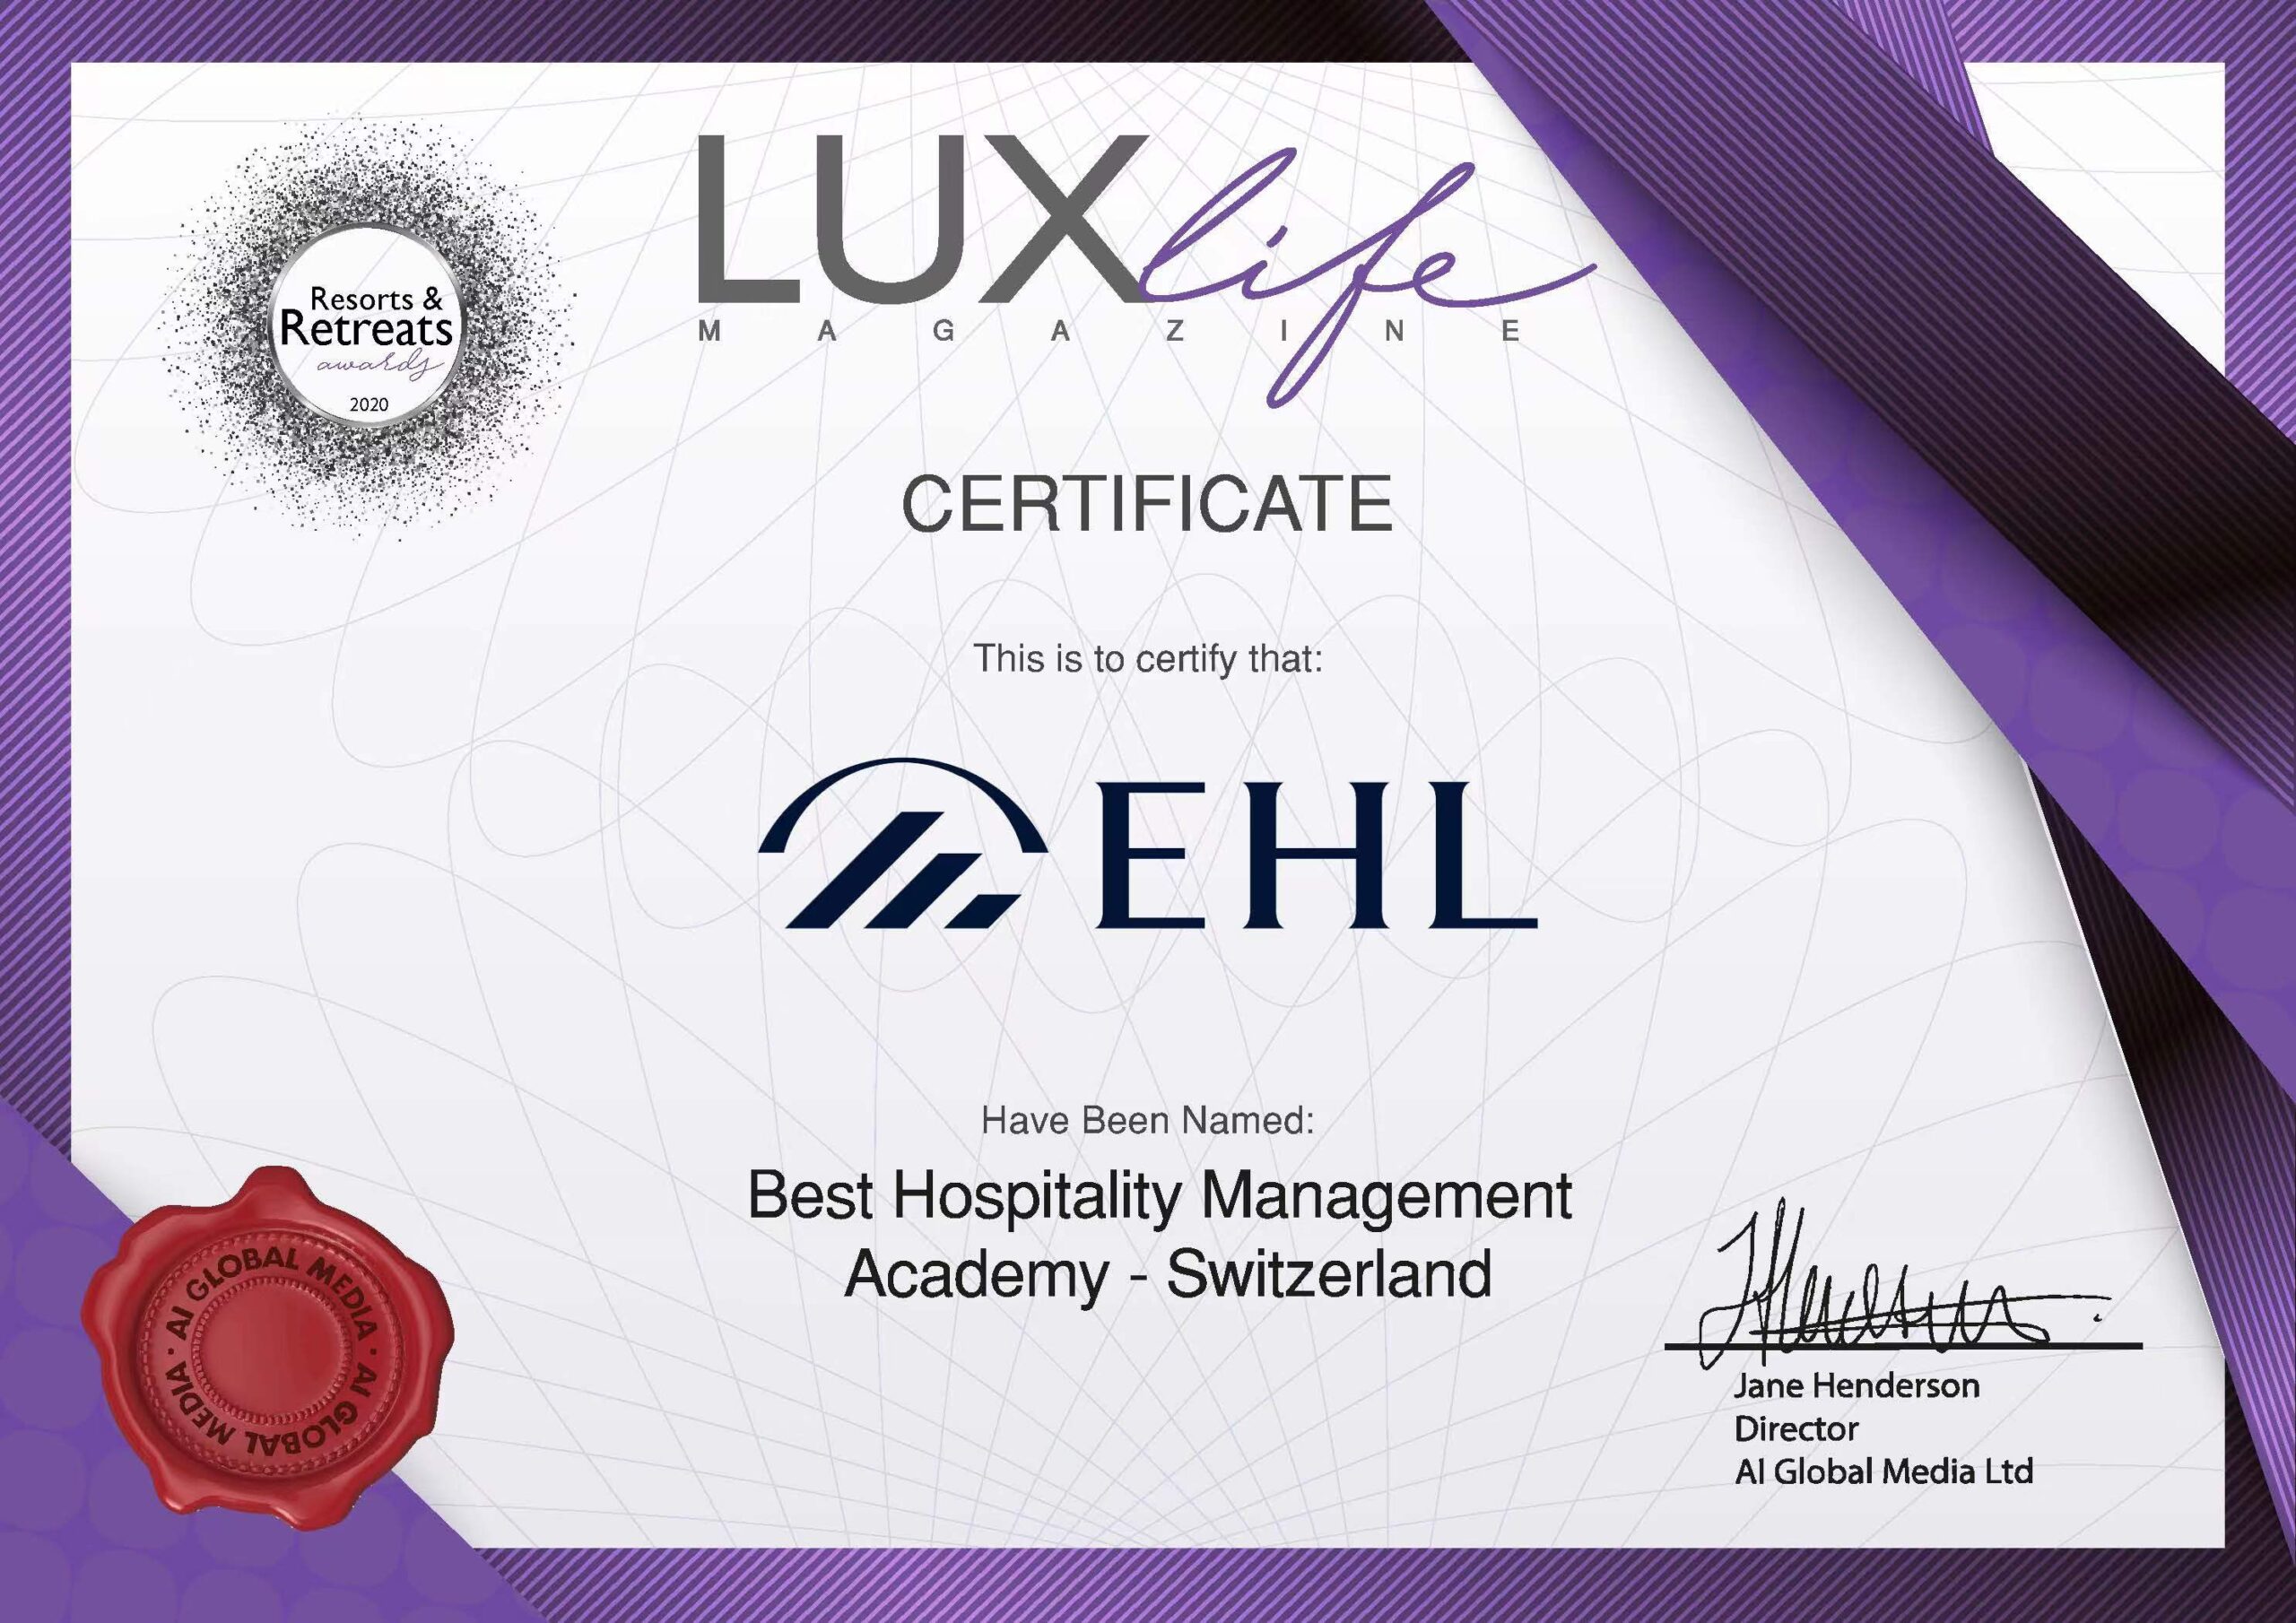 How to obtain a Swiss School of Hotel Management Certificate?